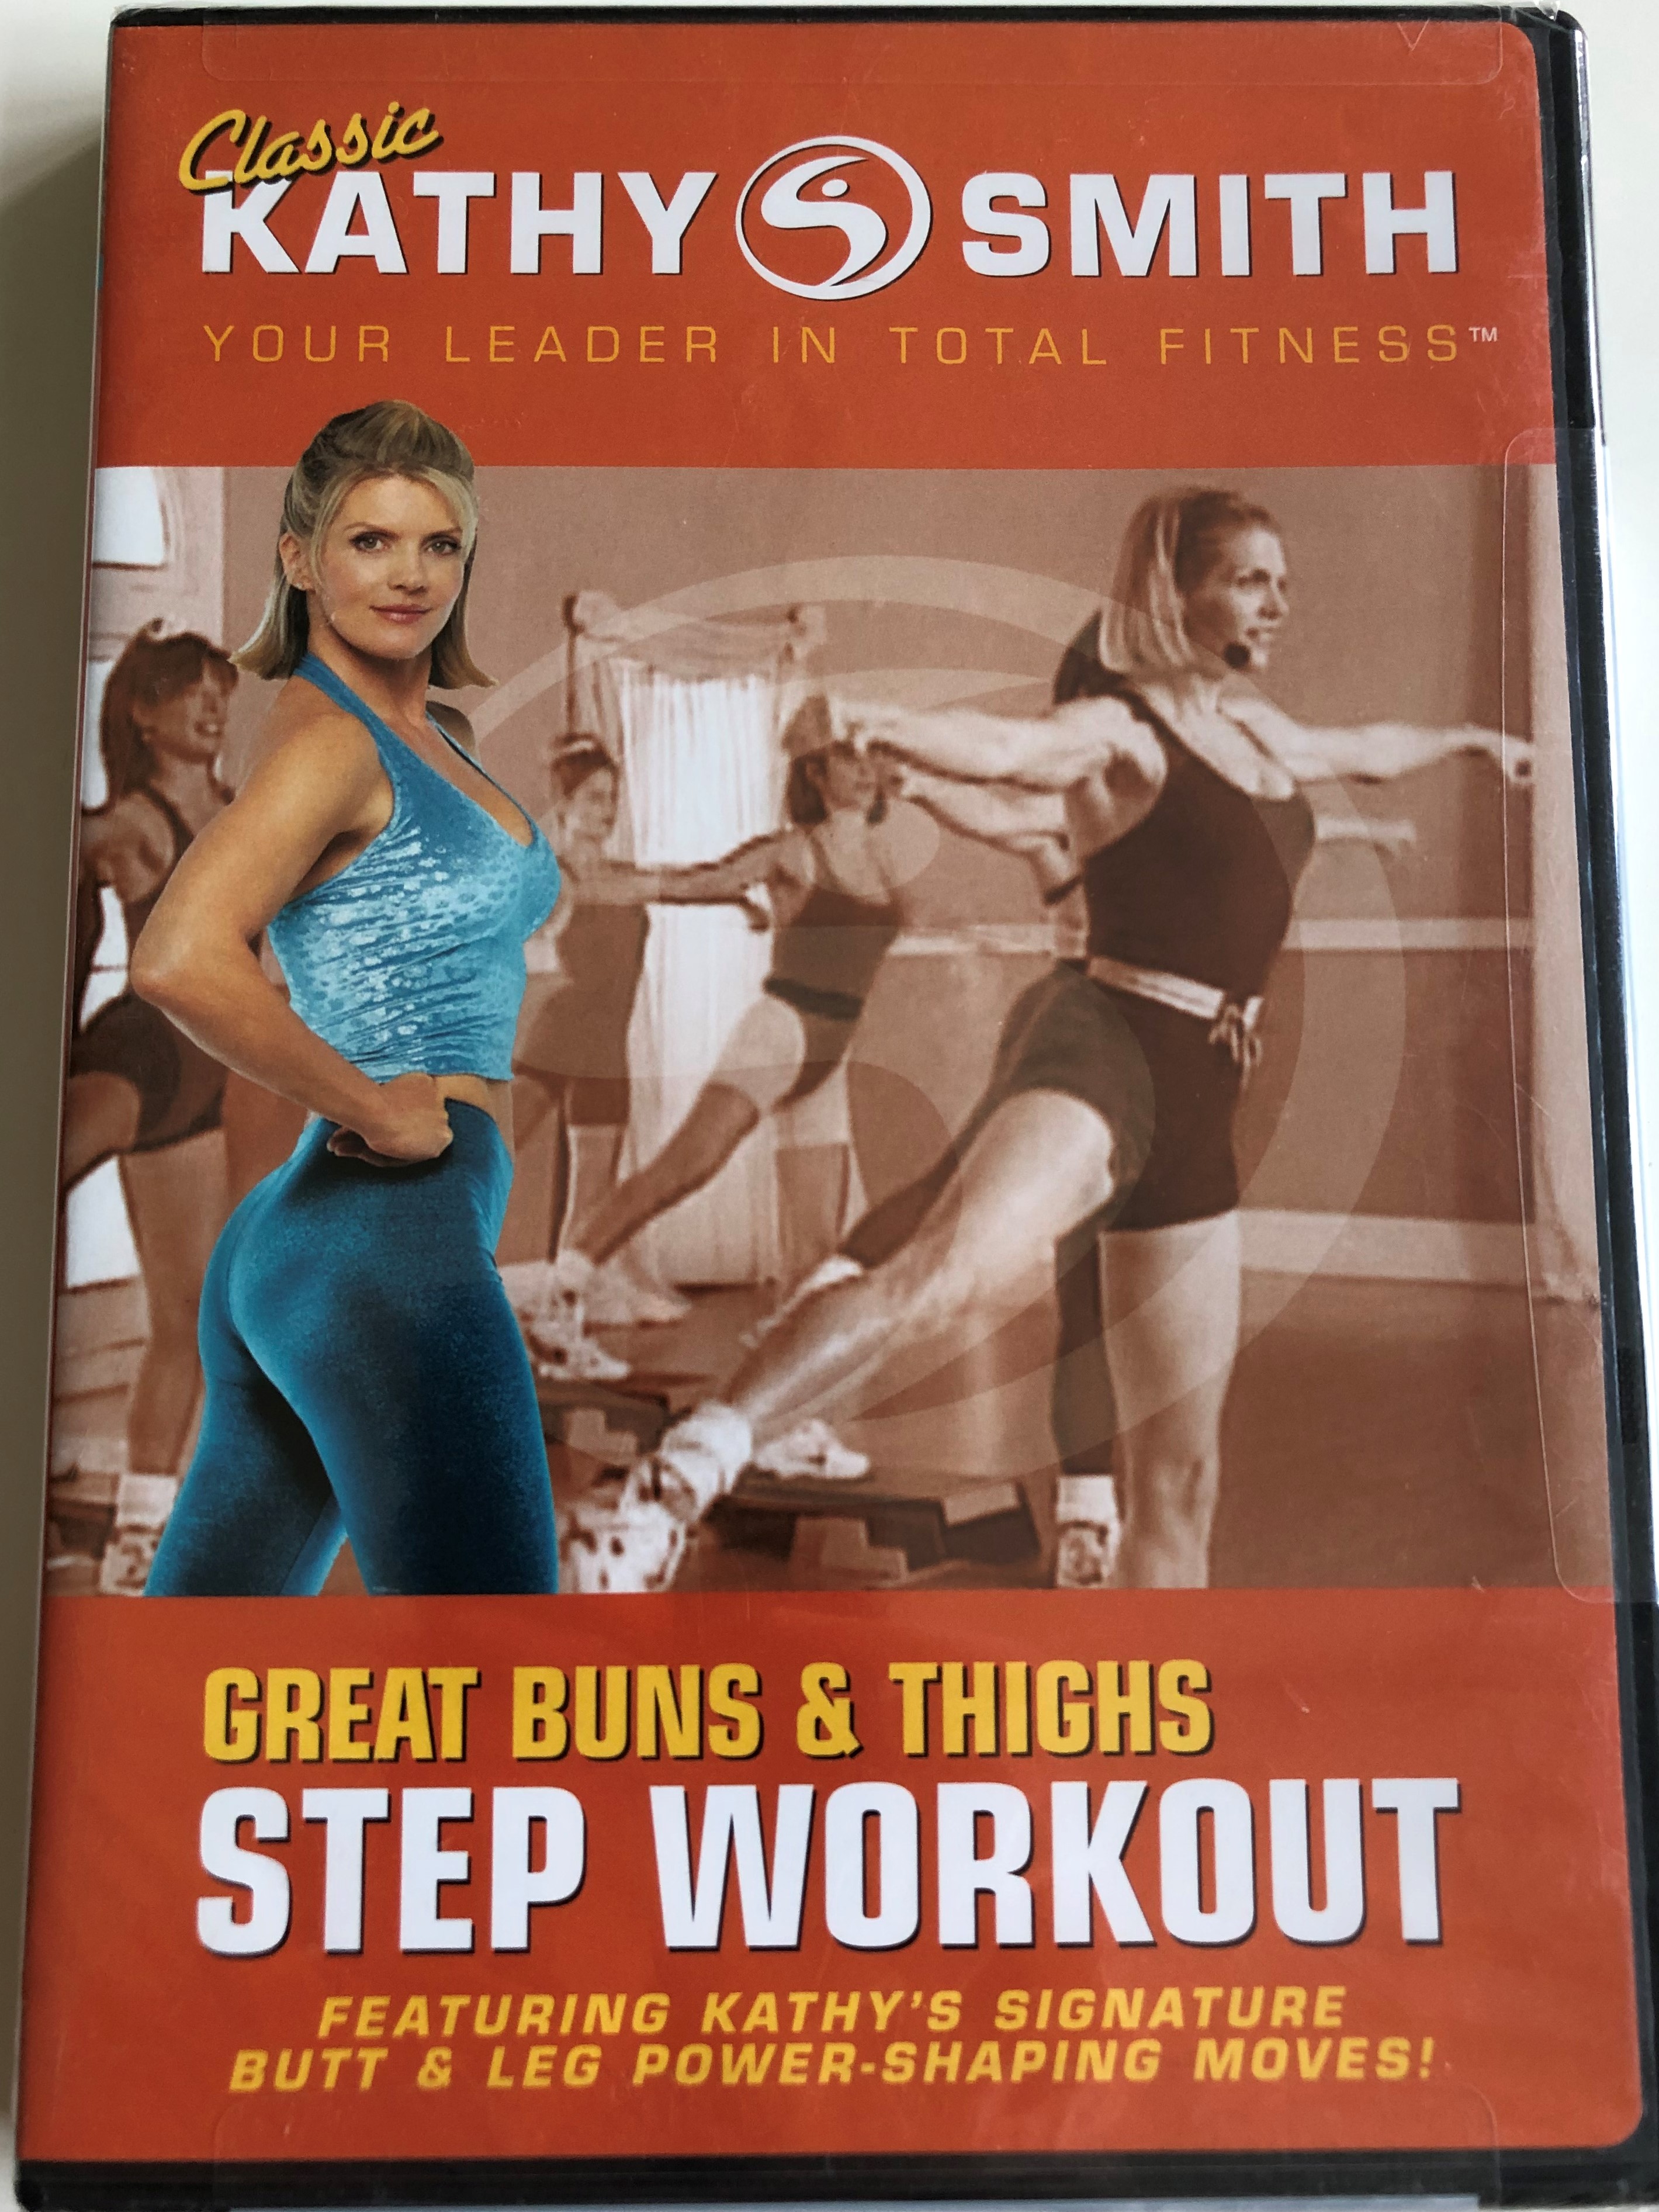 kathy-smith-step-workout-great-buns-thights-dvd-2006-featuring-kathy-s-signature-butt-leg-power-shpaing-moves-1-.jpg